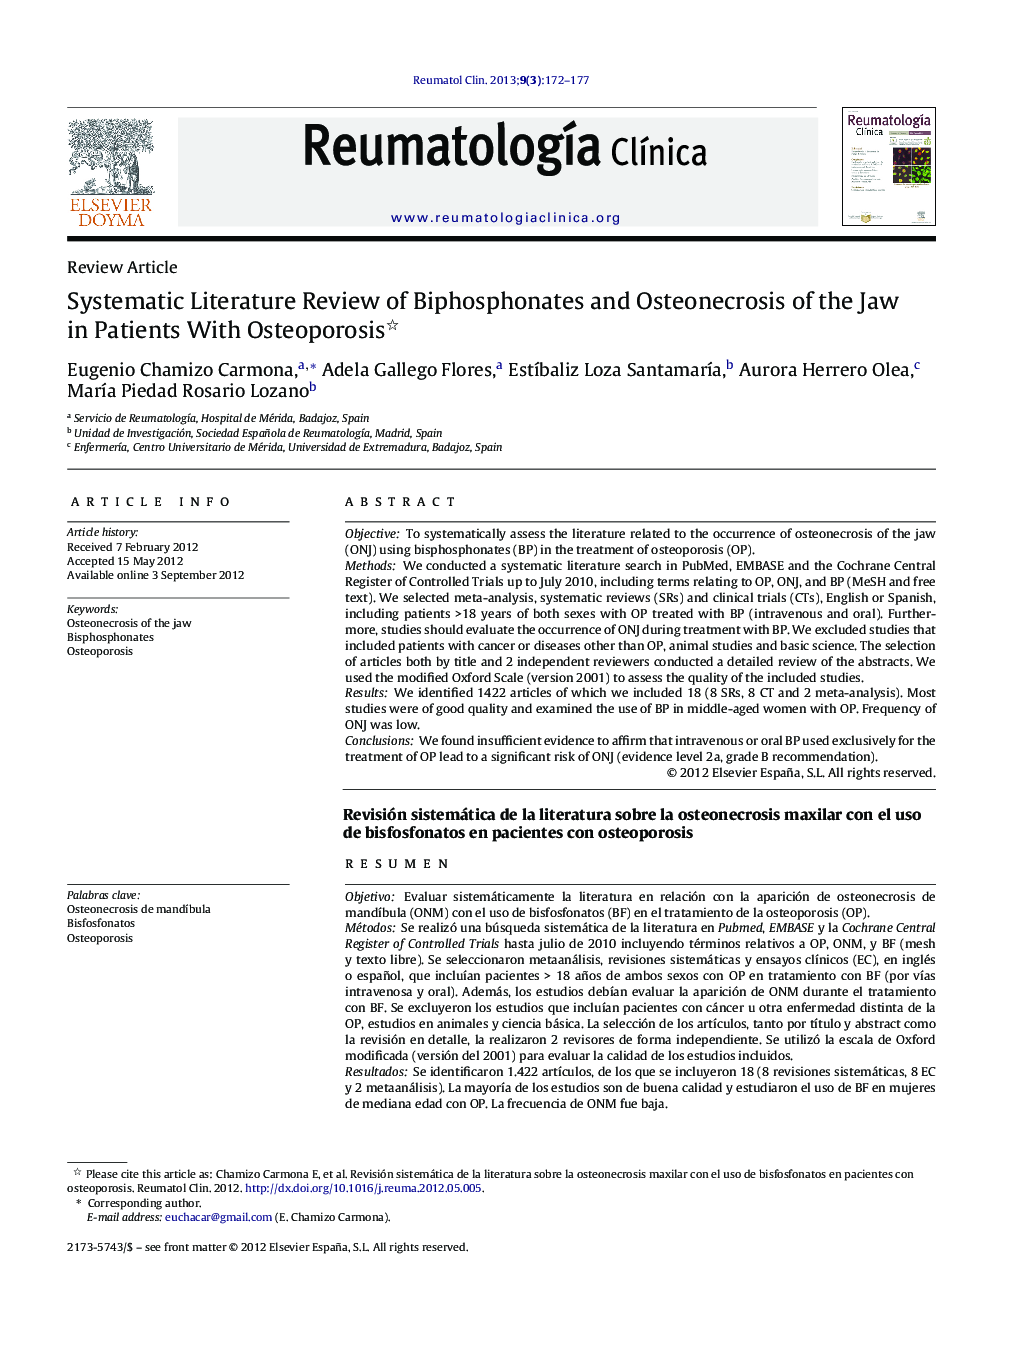 Systematic Literature Review of Biphosphonates and Osteonecrosis of the Jaw in Patients With Osteoporosis 